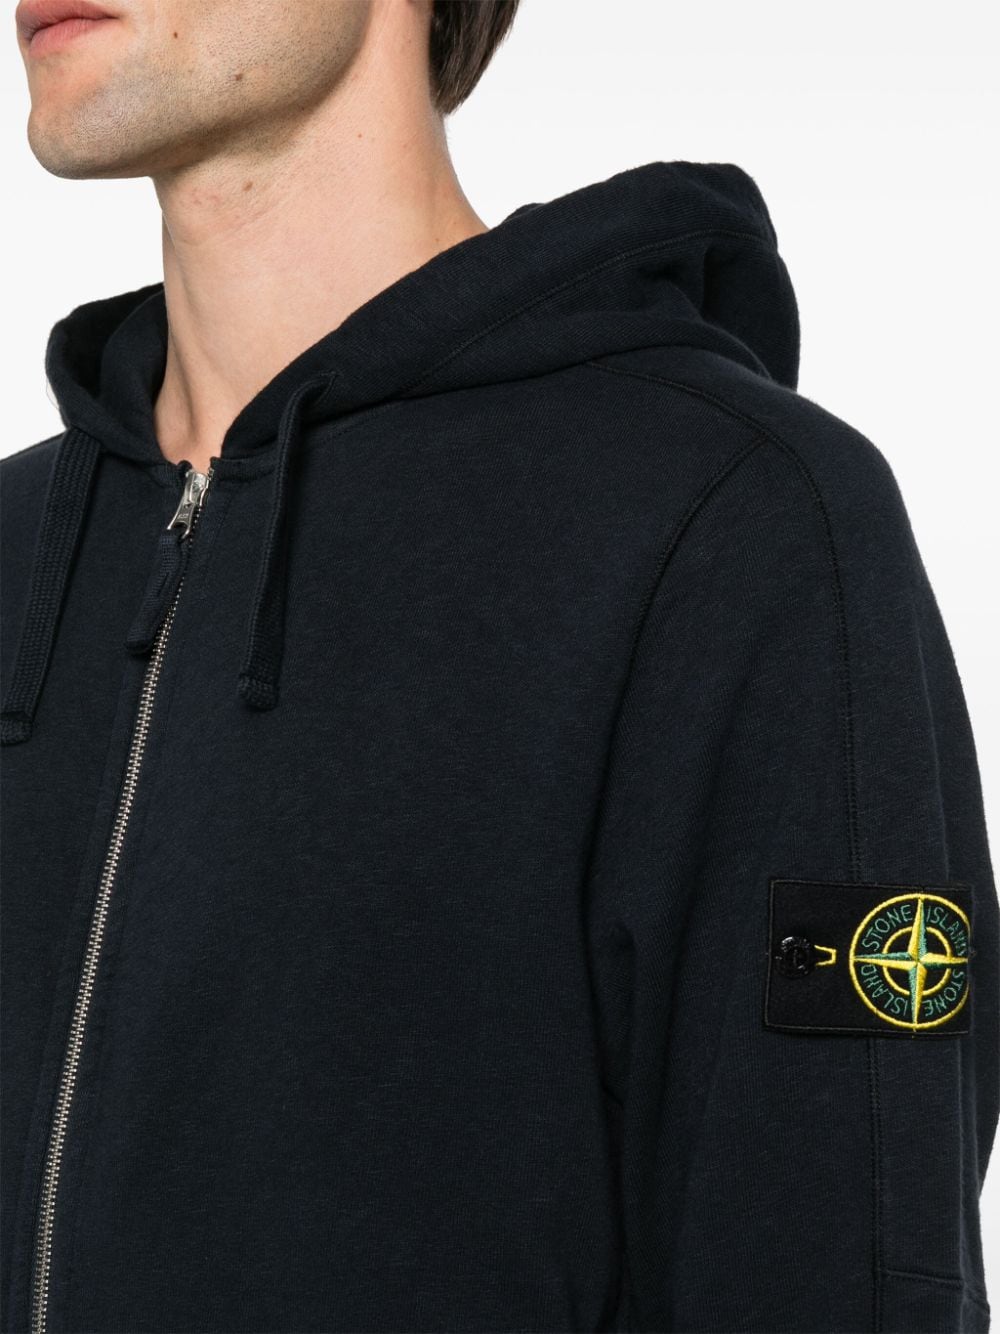 Compass cotton hoodie<BR/><BR/><BR/>